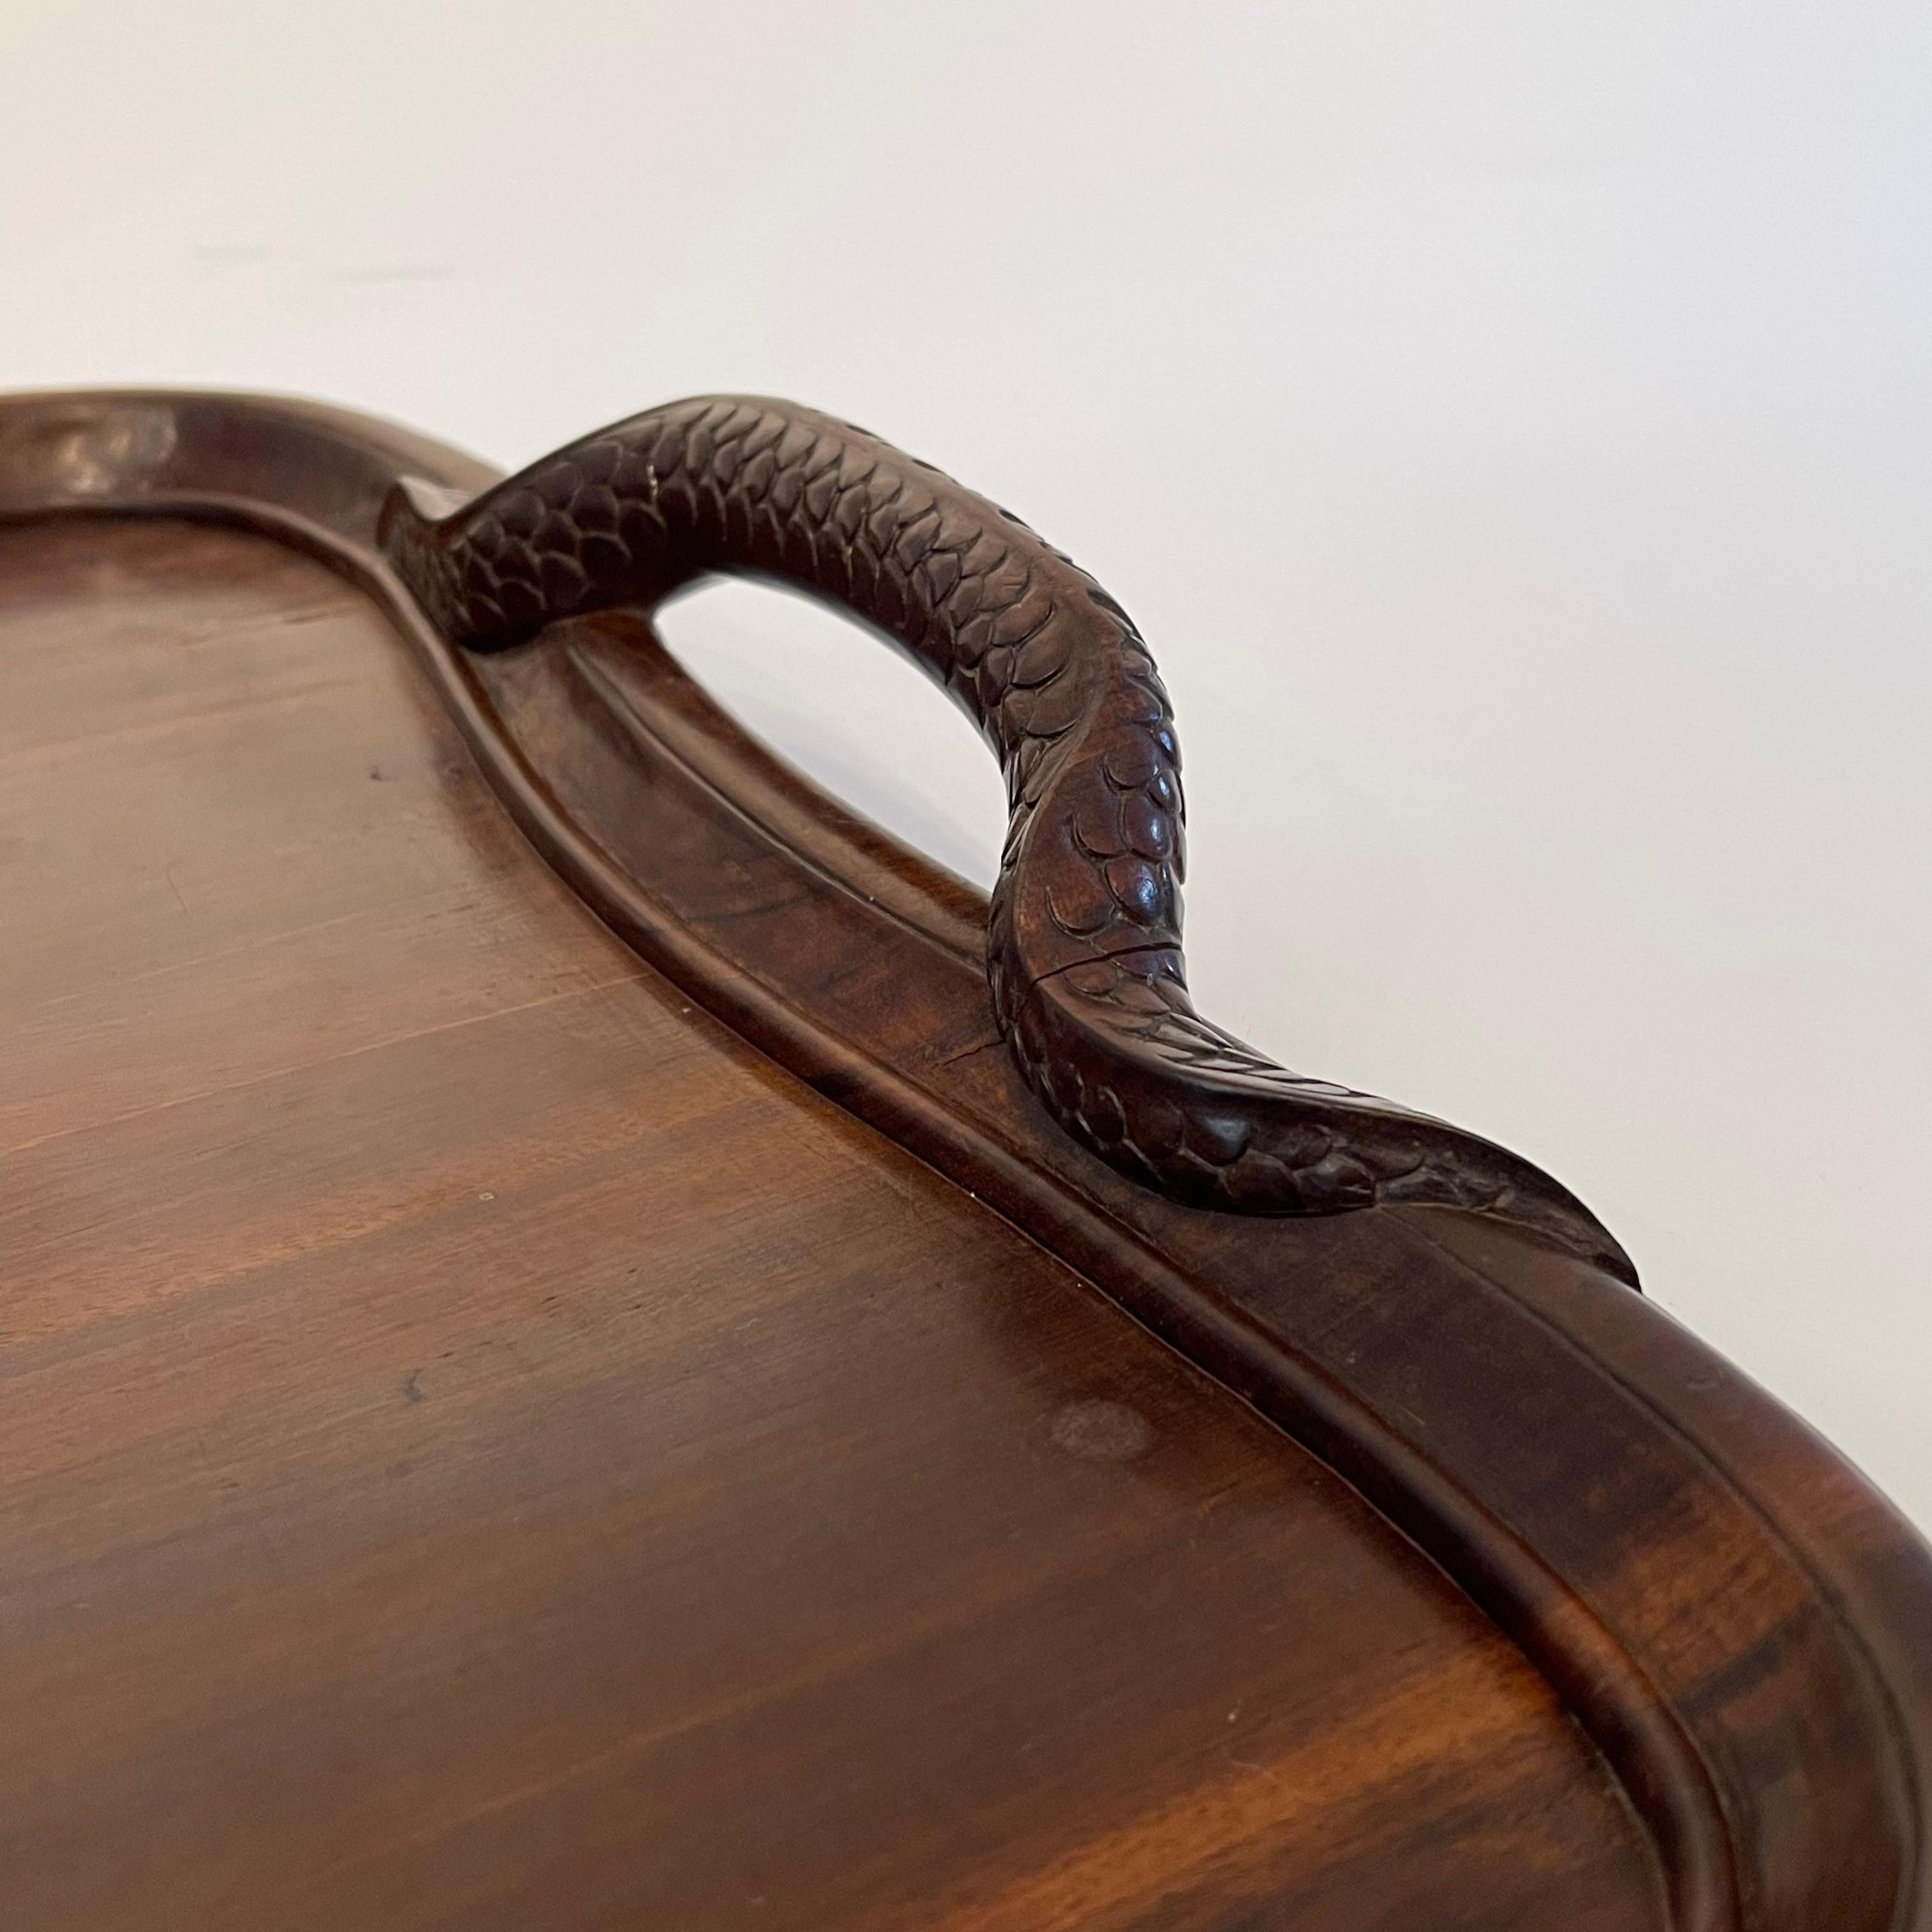 A beautiful hand carved double headed dragon tray with curved edges and two raised handles in the form of a dragon tail, the tail detailed with carved scales and fins snakes around the rim of the tray.